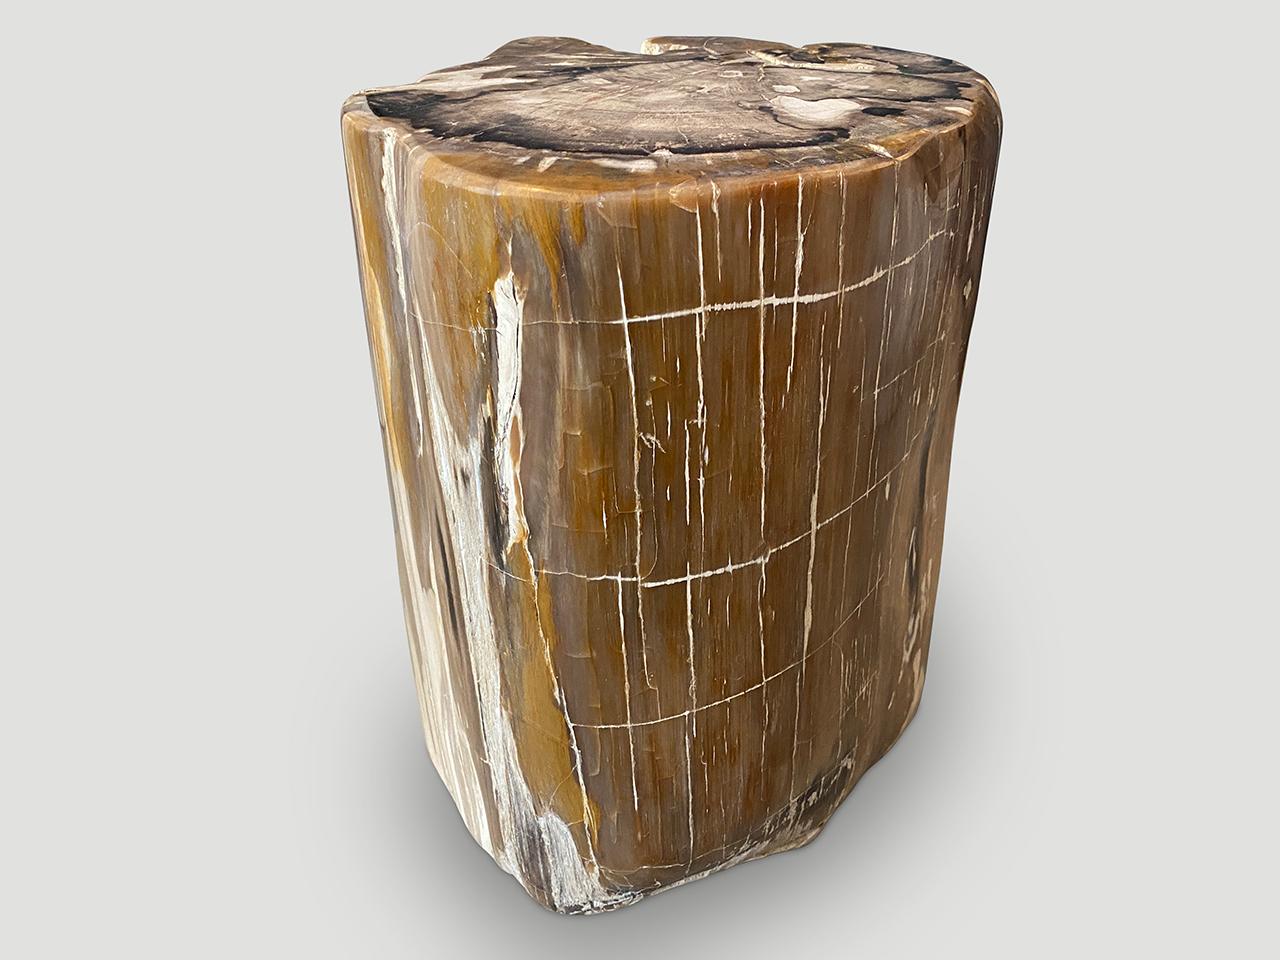 Beautiful tones and textures in this ancient petrified wood side table. It’s fascinating how Mother Nature produces these exquisite 40 million year old petrified teak logs with such contrasting colors and natural patterns throughout. Modern yet with